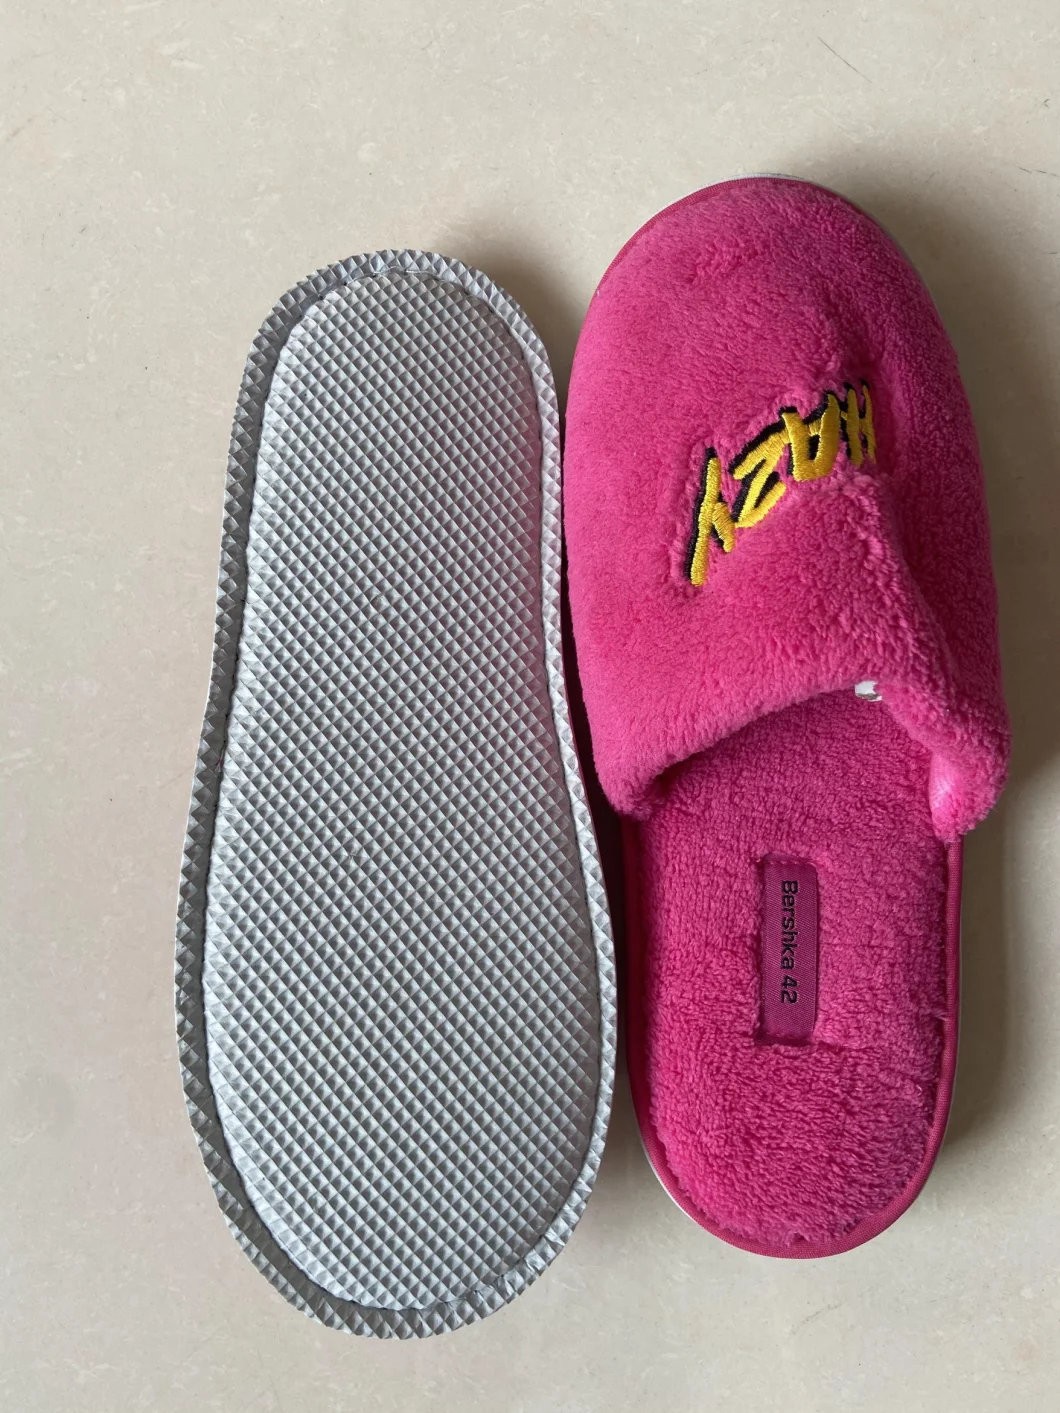 White Hotel Slippers Closed Toe with 5 Star Quality